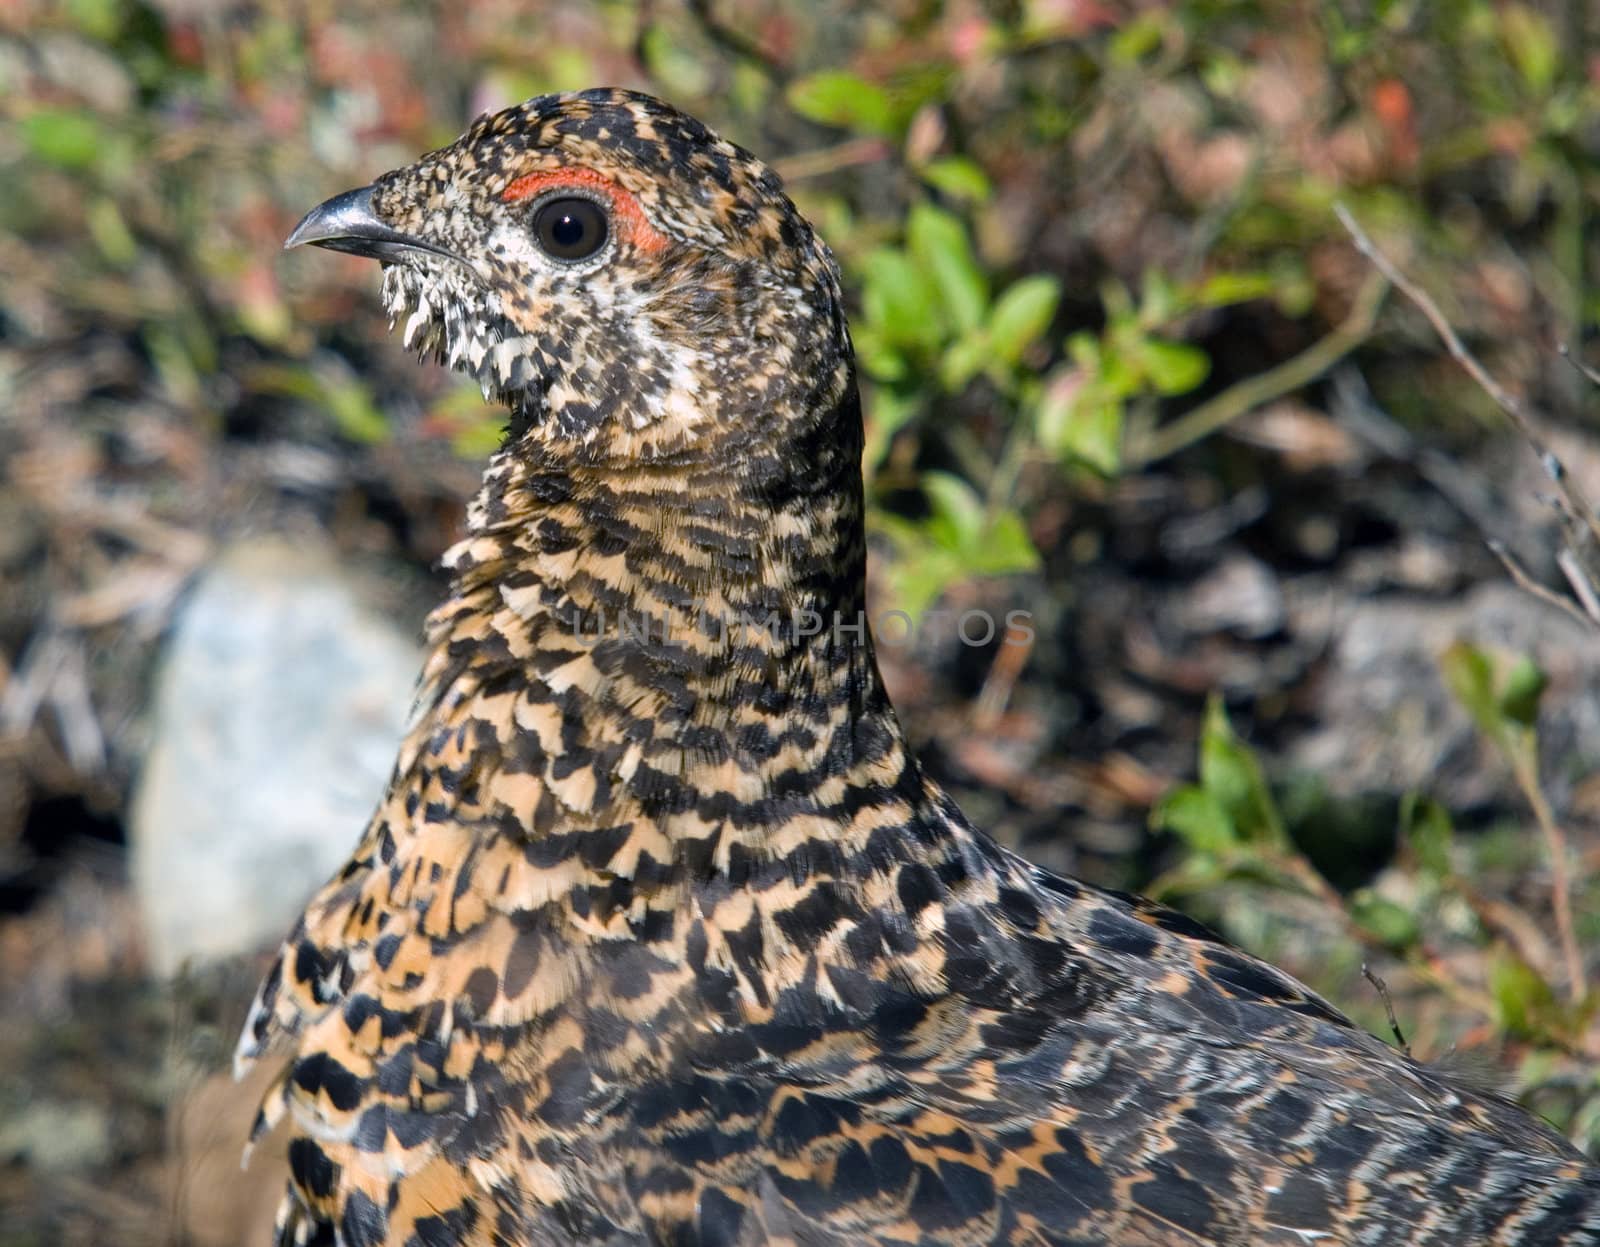 Closeup portrait of a spruce grouse in it's natural environment